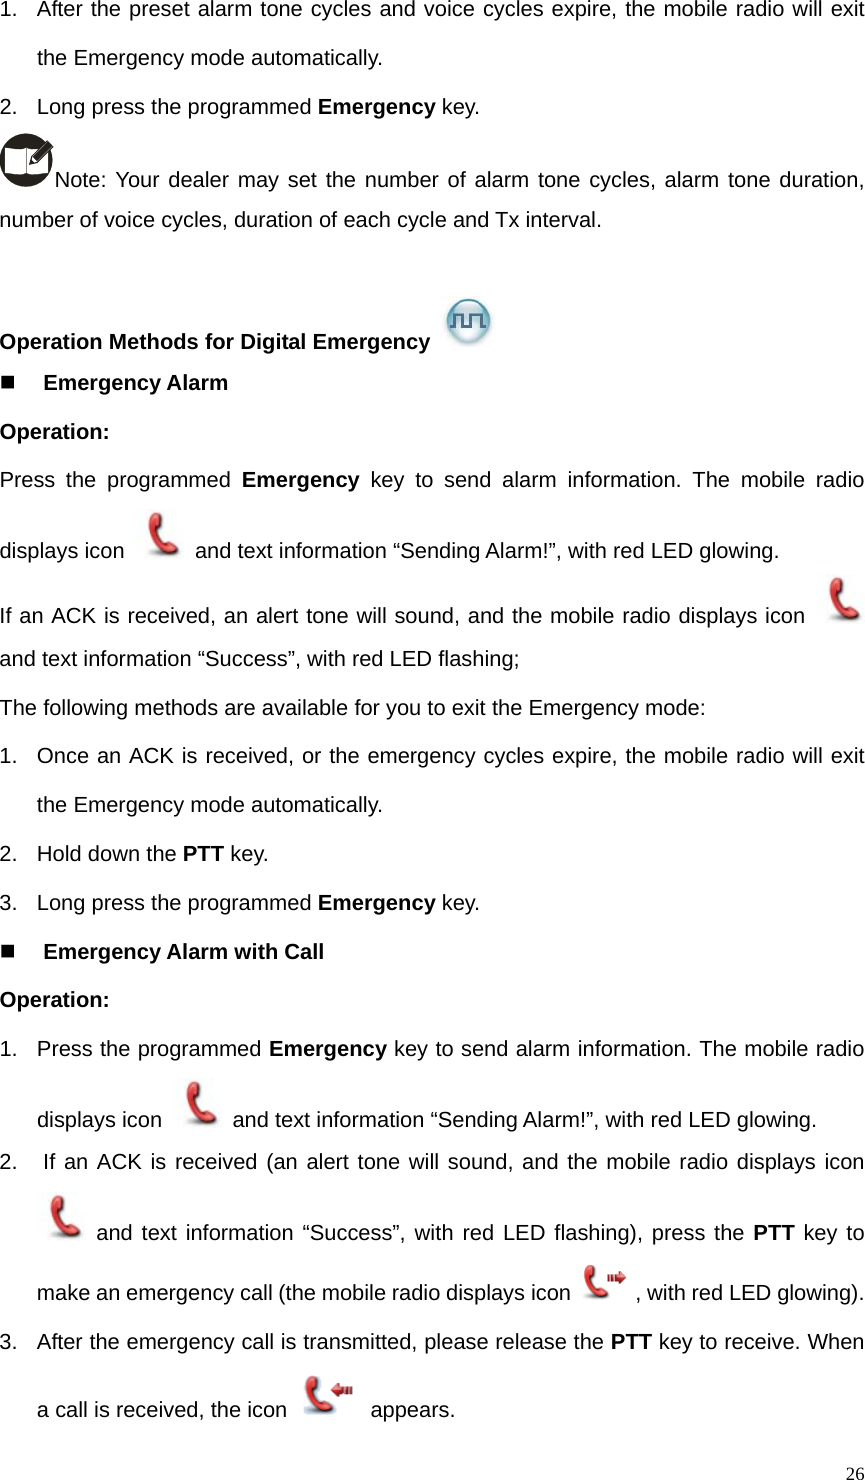   261.  After the preset alarm tone cycles and voice cycles expire, the mobile radio will exit the Emergency mode automatically.   2.  Long press the programmed Emergency key. Note: Your dealer may set the number of alarm tone cycles, alarm tone duration, number of voice cycles, duration of each cycle and Tx interval.    Operation Methods for Digital Emergency    Emergency Alarm Operation:  Press the programmed Emergency key to send alarm information. The mobile radio displays icon    and text information “Sending Alarm!”, with red LED glowing.   If an ACK is received, an alert tone will sound, and the mobile radio displays icon   and text information “Success”, with red LED flashing;   The following methods are available for you to exit the Emergency mode: 1.  Once an ACK is received, or the emergency cycles expire, the mobile radio will exit the Emergency mode automatically.   2.  Hold down the PTT key. 3.  Long press the programmed Emergency key.  Emergency Alarm with Call Operation:   1.  Press the programmed Emergency key to send alarm information. The mobile radio displays icon    and text information “Sending Alarm!”, with red LED glowing.   2.   If an ACK is received (an alert tone will sound, and the mobile radio displays icon  and text information “Success”, with red LED flashing), press the PTT key to make an emergency call (the mobile radio displays icon , with red LED glowing). 3.  After the emergency call is transmitted, please release the PTT key to receive. When a call is received, the icon   appears.  